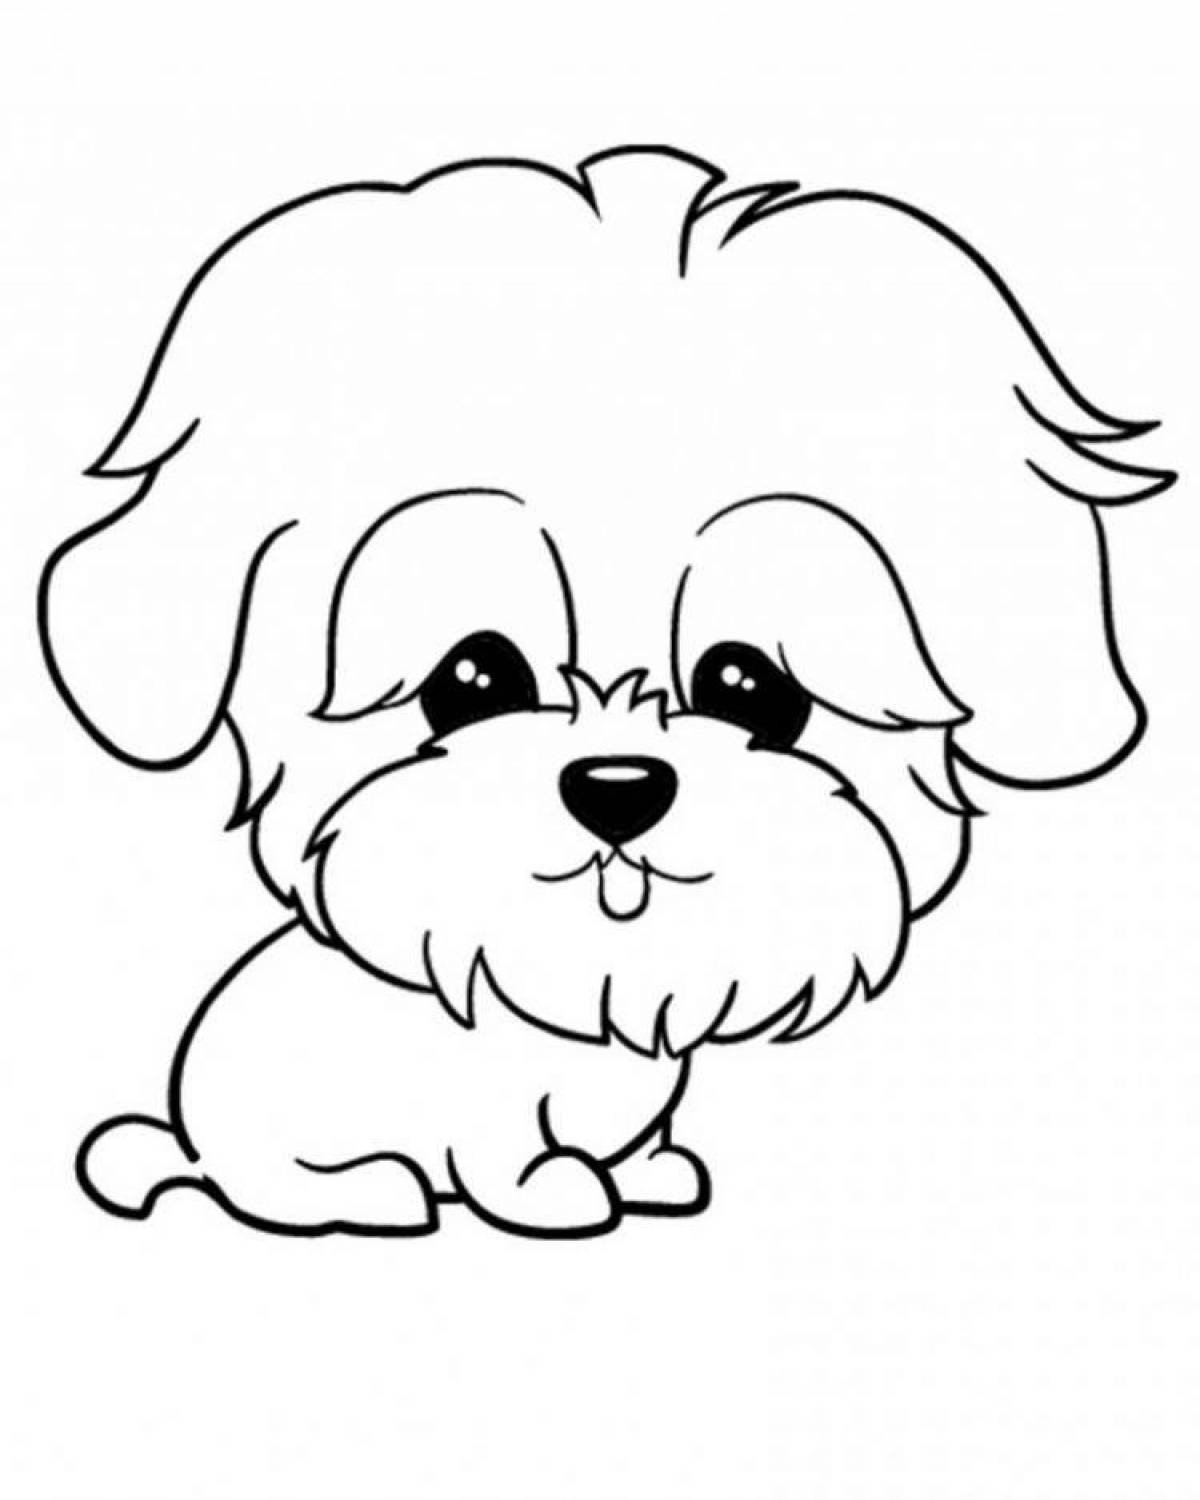 Cute dog coloring page